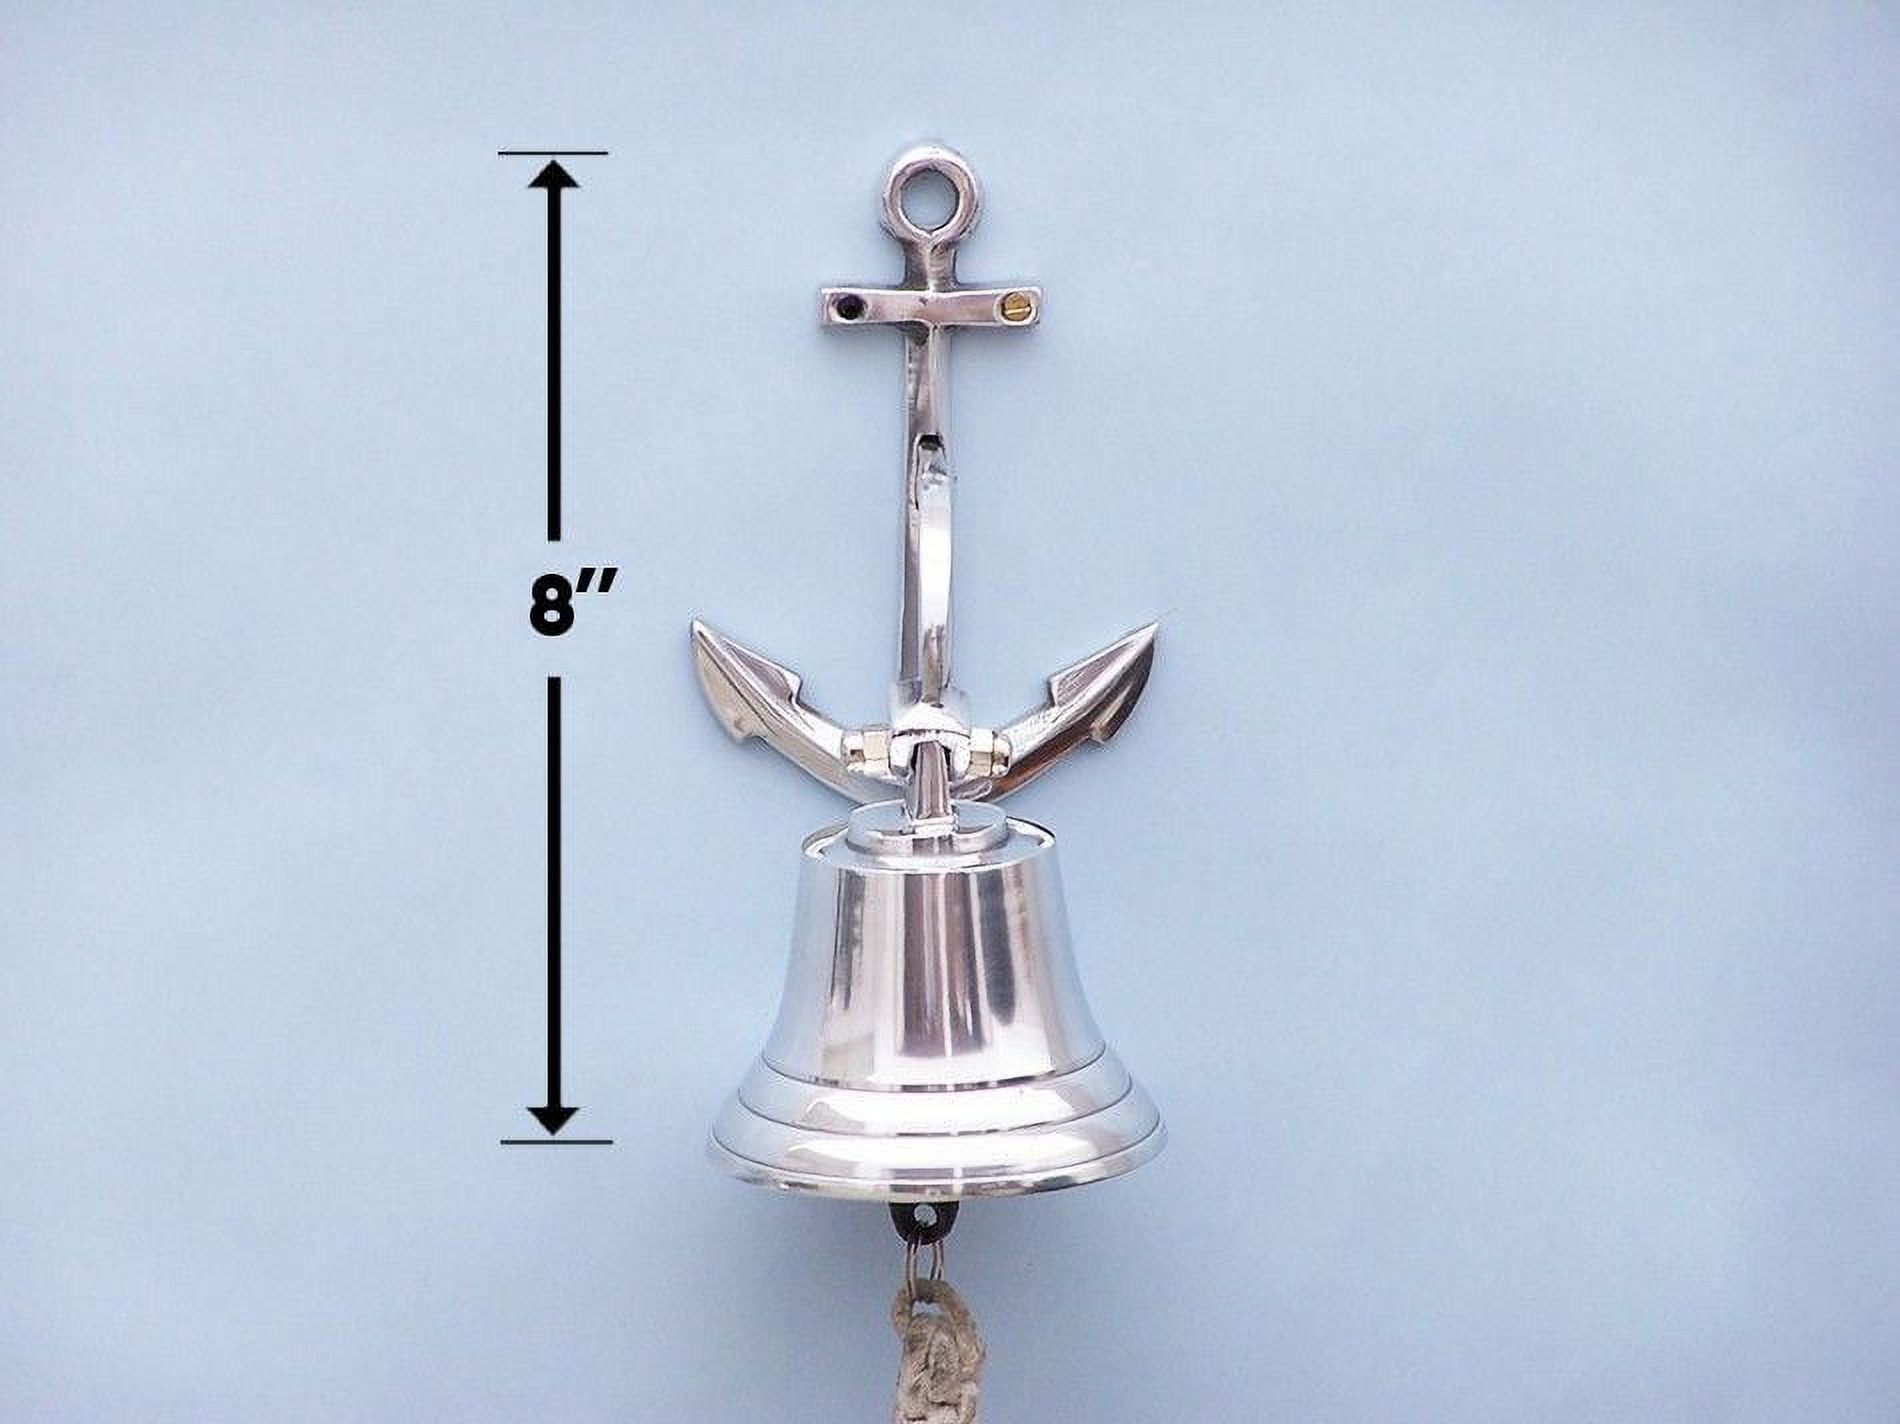 Anchor Chrome Bell 4" - Chrome Hanging Bell - Nautical Bell - Decorative Chrome Bell - Anchor Decoration - Nautical Decoration - image 2 of 2